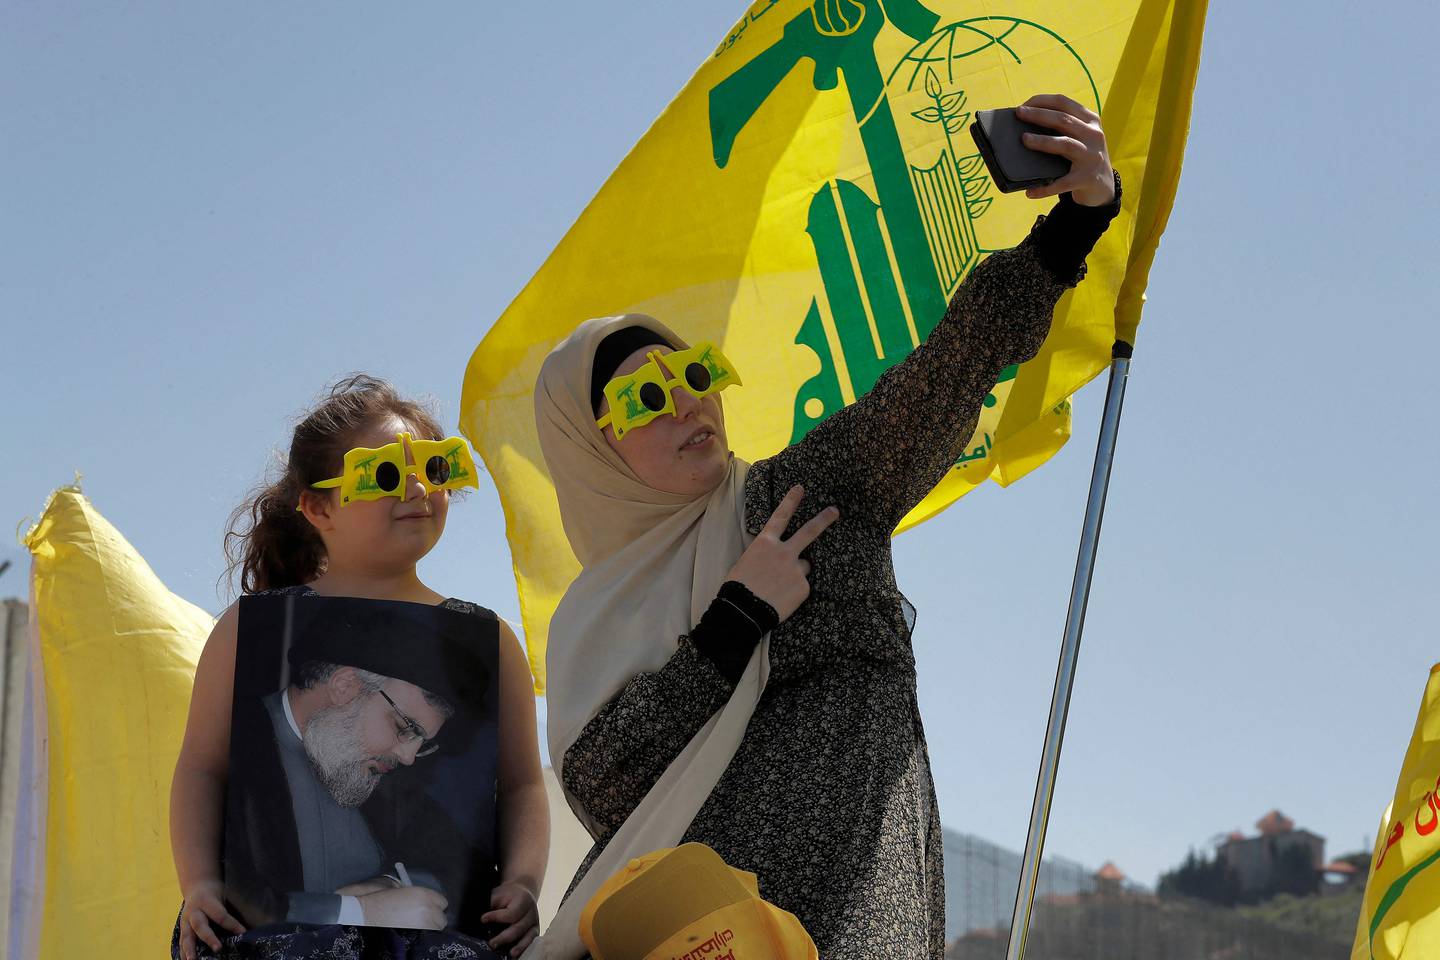 A supporter of Lebanon's Shiite Muslim Hezbollah movement poses for a selfie with a child and the group's flags in Lebanon's southern town of Kfar Kila on May 25. AFP